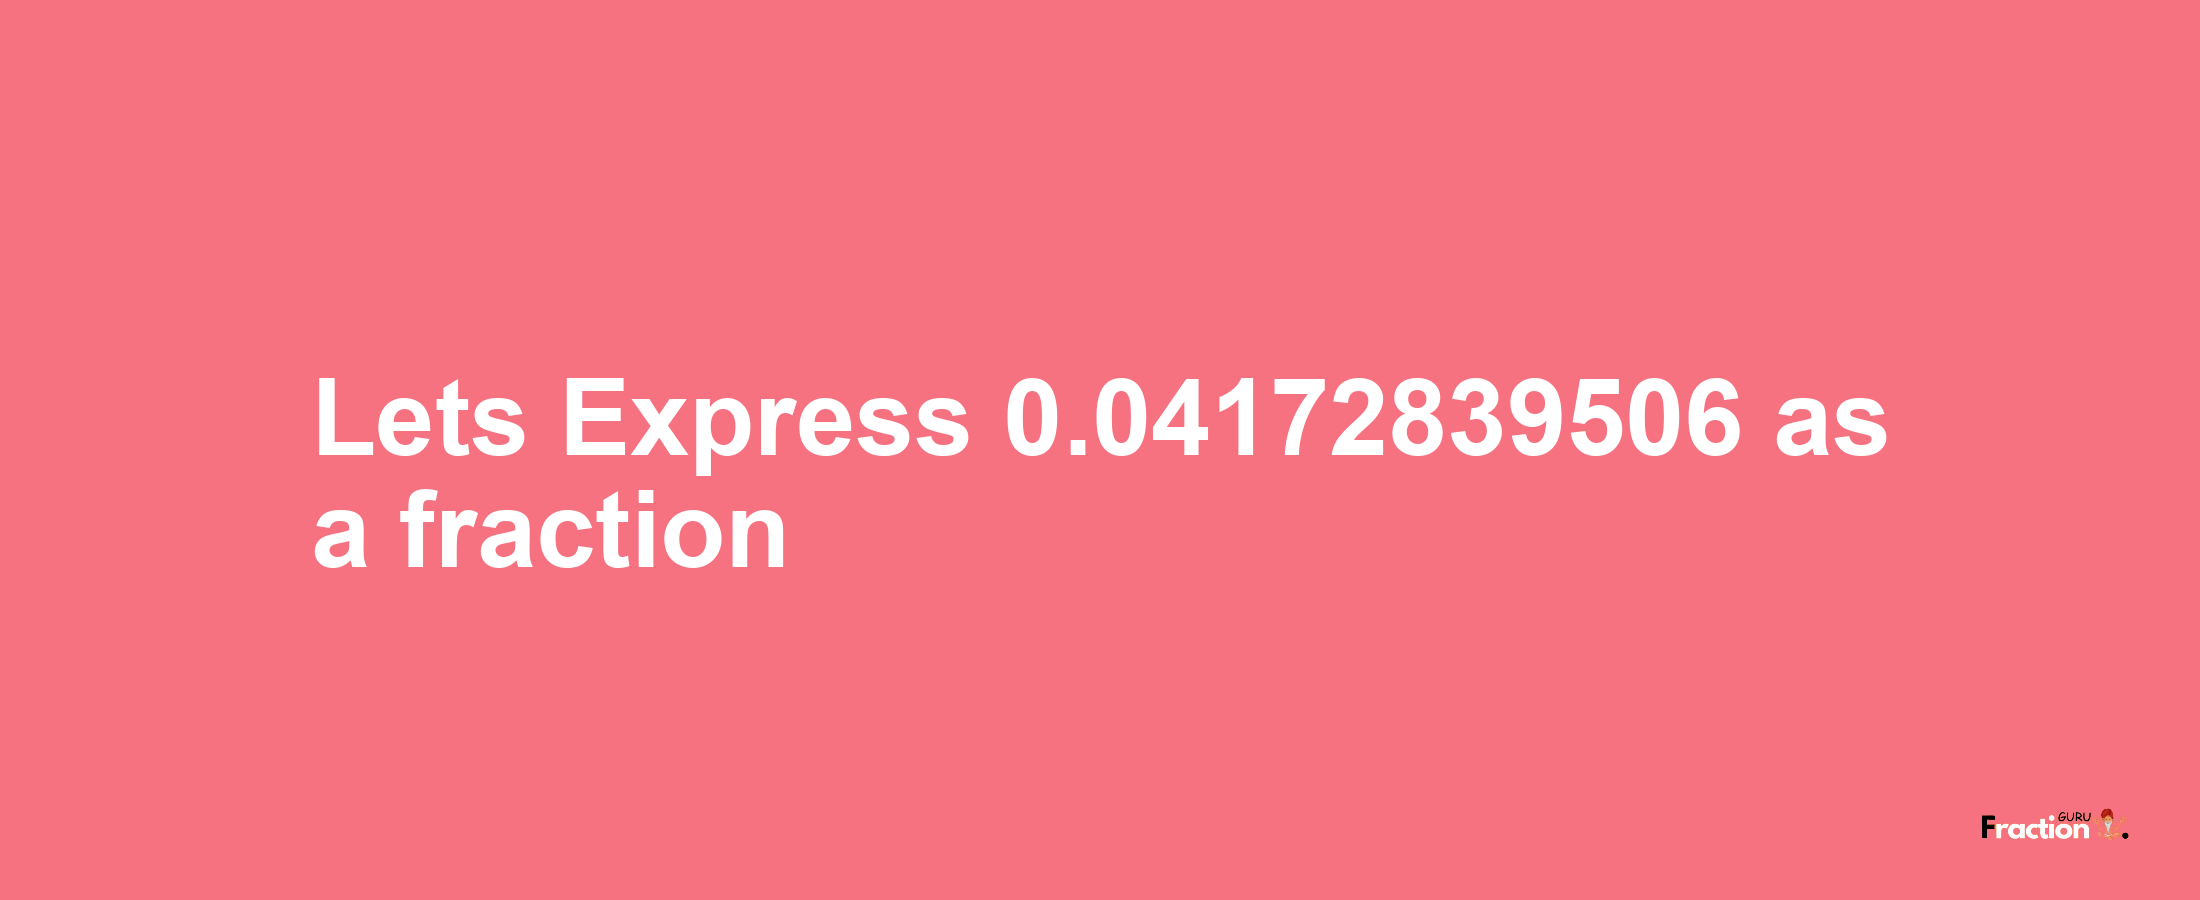 Lets Express 0.04172839506 as afraction